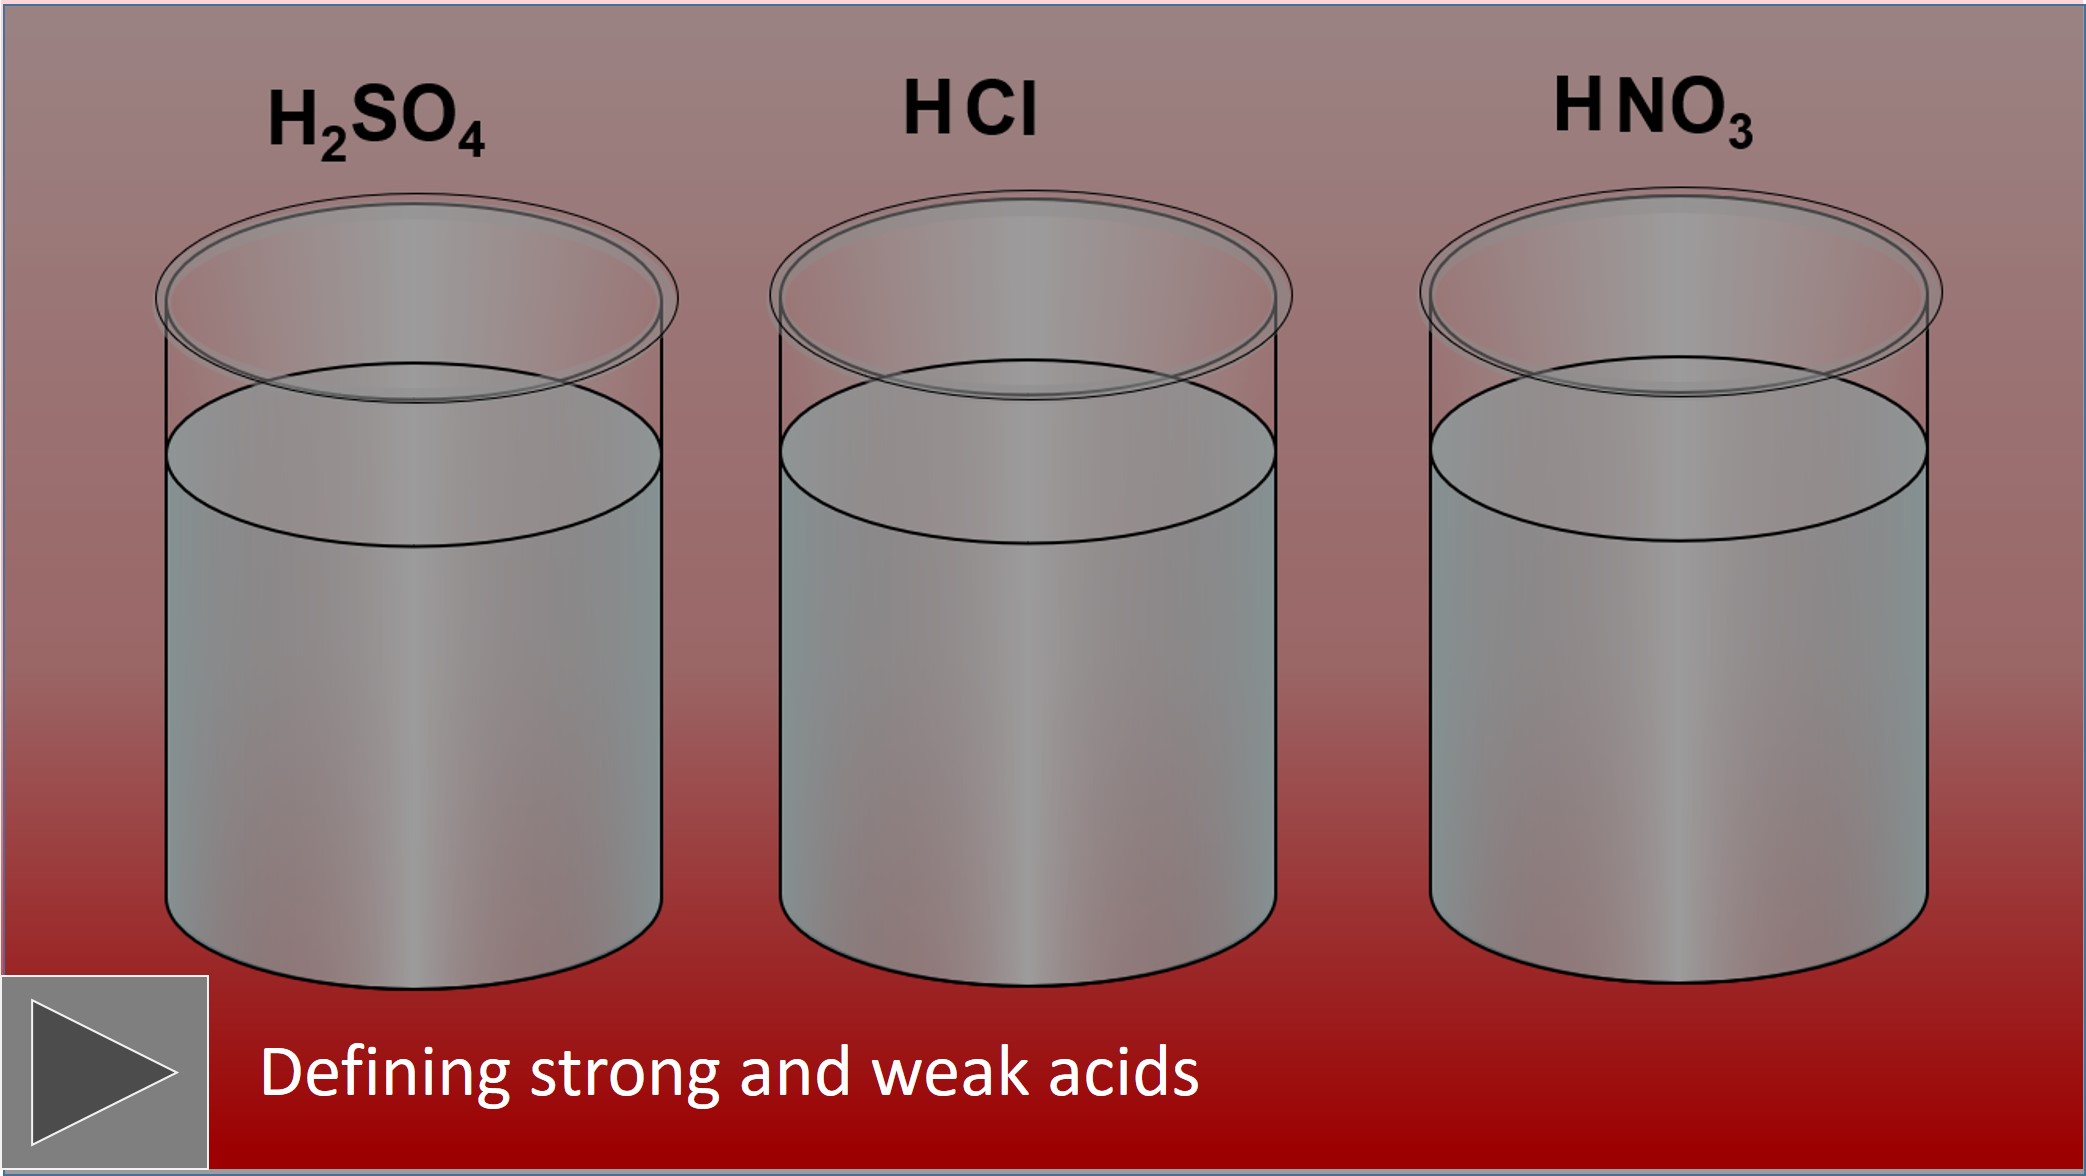 image to show ionisation of strong acids